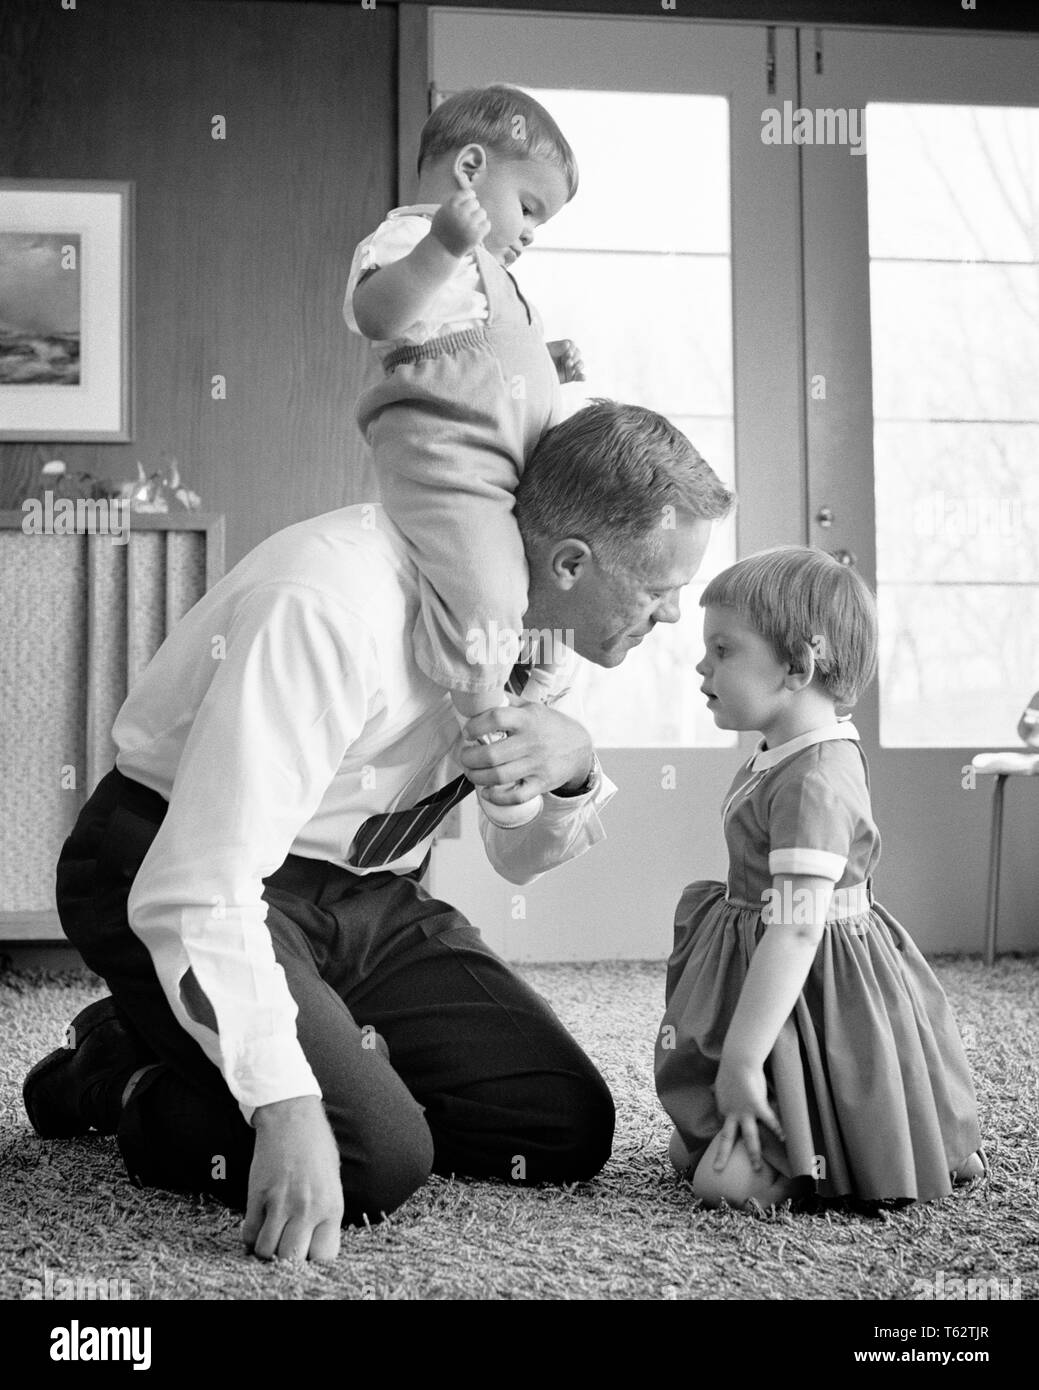 1960s FATHER PLAYING ON FLOOR WITH CHILDREN KNEELING WITH TODDLER GIRL BABY BOY SITTING ON HIS SHOULDERS - j11792 HAR001 HARS SISTER 1 JUVENILE SONS PARENTING FEMALES BROTHERS HOME LIFE COPY SPACE FRIENDSHIP HALF-LENGTH DAUGHTERS PERSONS CARING MALES SIBLINGS SISTERS FATHERS B&W KNEELING HAPPINESS HIS DADS SIBLING BABY BOY PIGGY BACK GROWTH JUVENILES PIGGYBACK TOGETHERNESS BLACK AND WHITE CAUCASIAN ETHNICITY HAR001 OLD FASHIONED Stock Photo